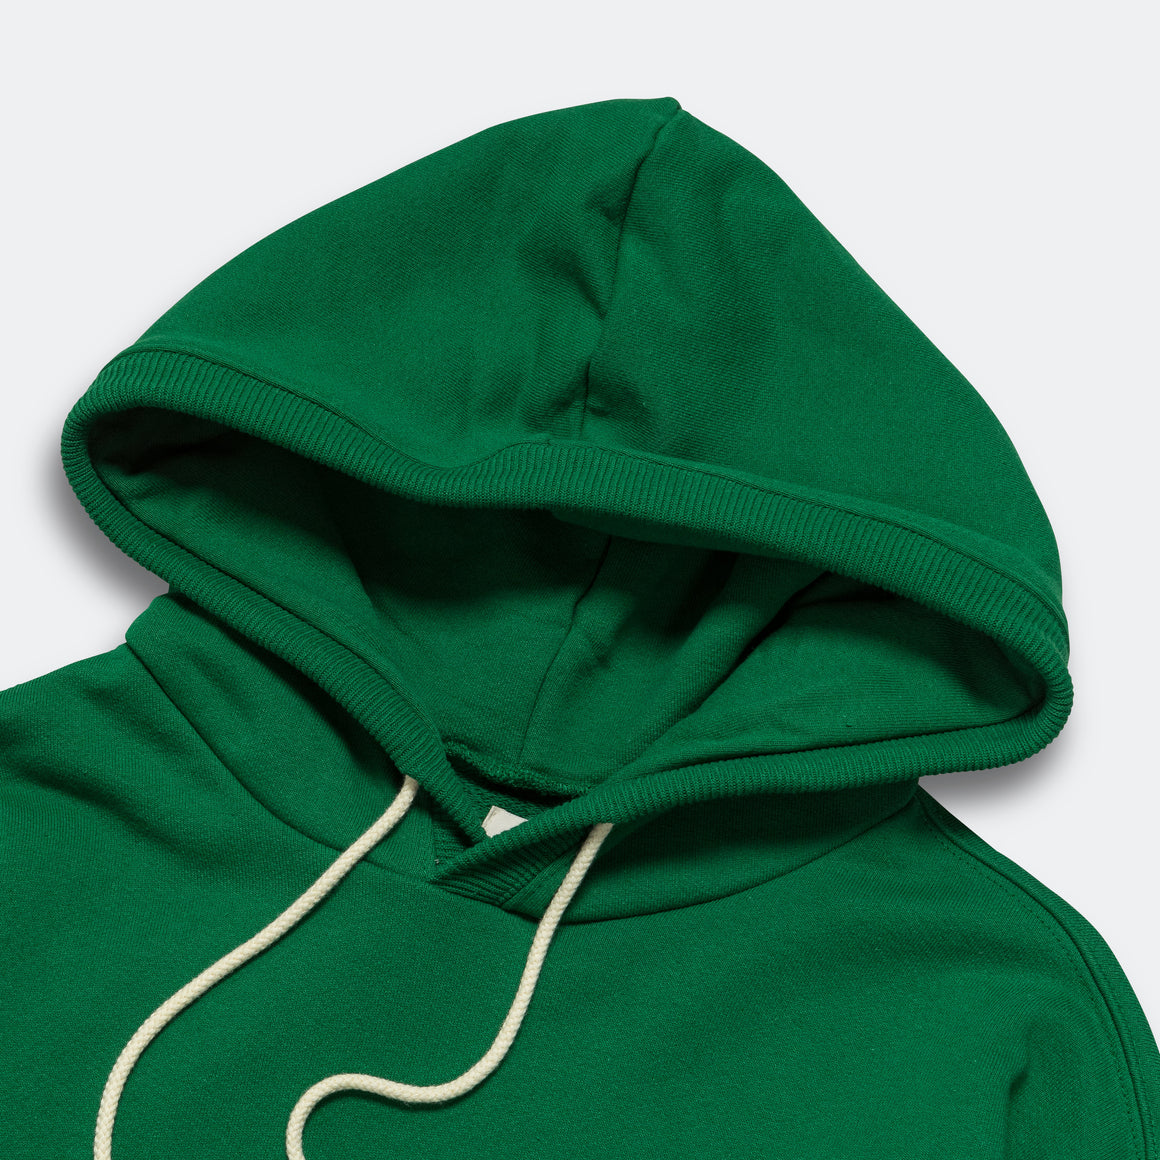 MADE in USA Hoodie - Classic Pine